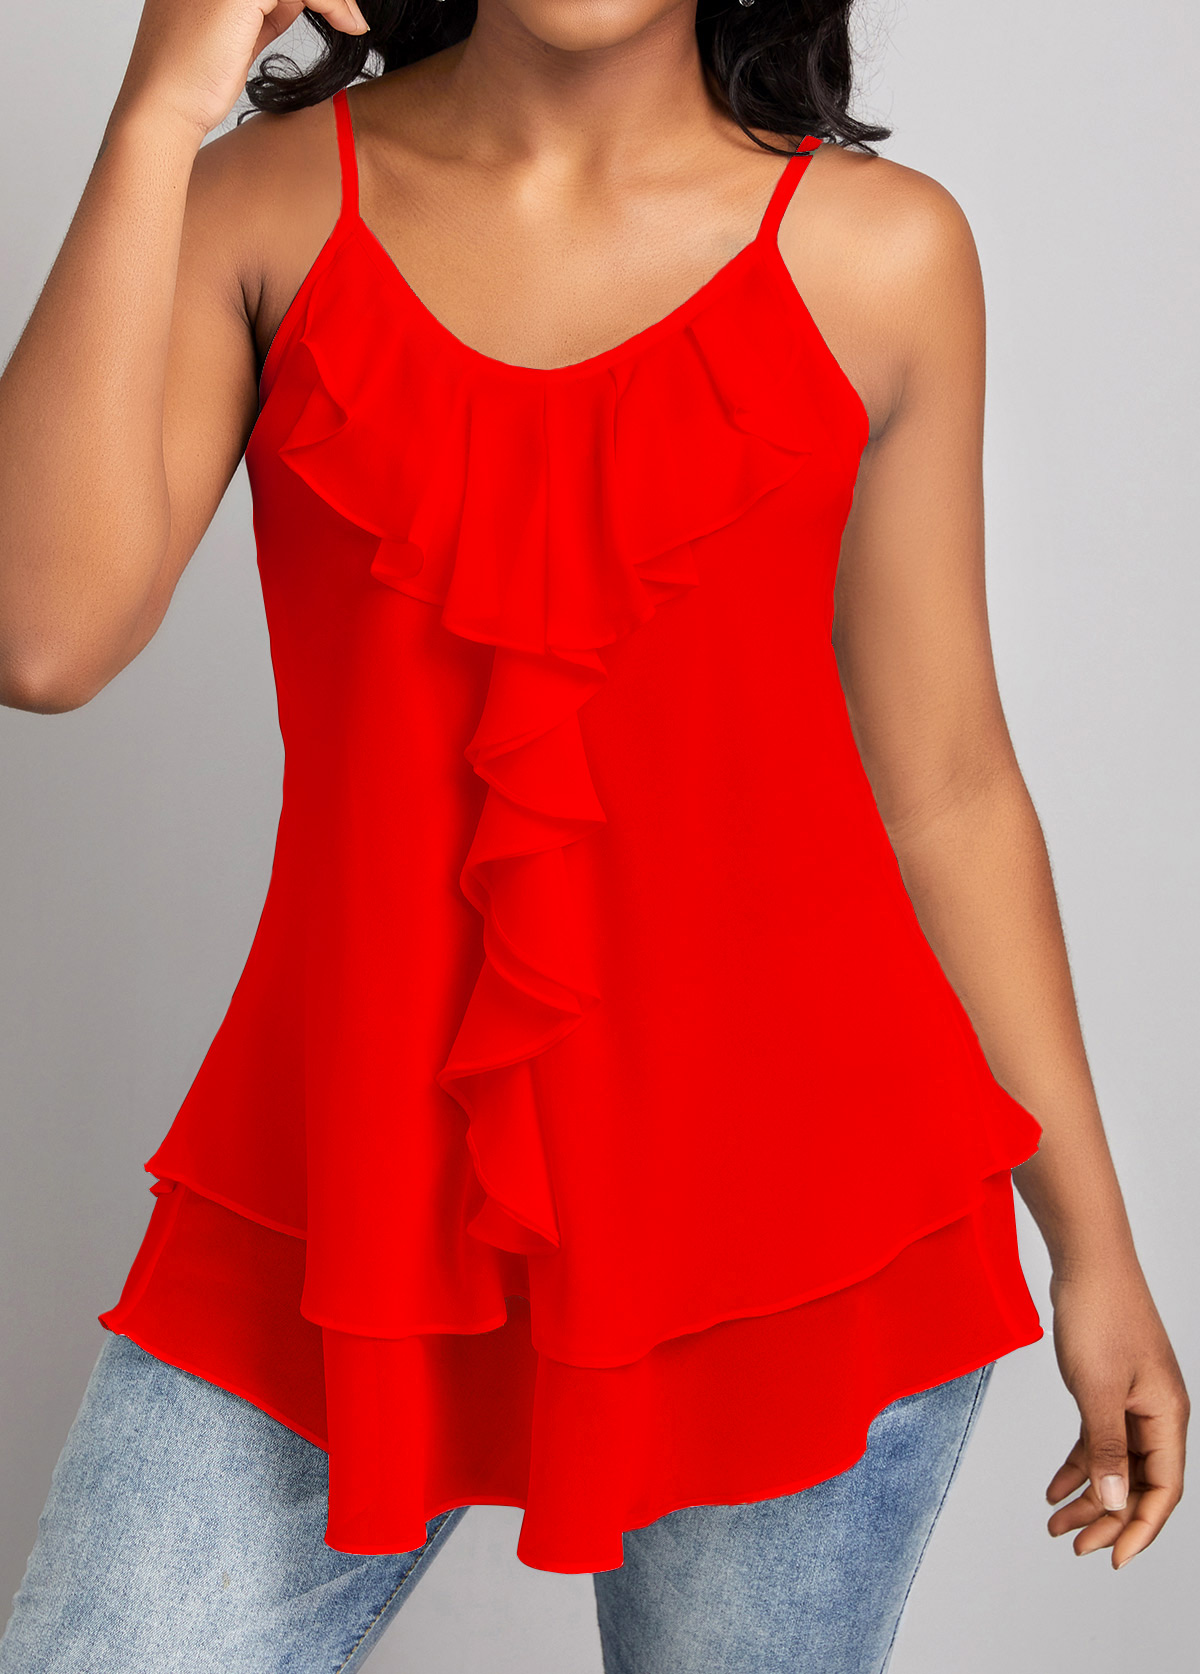 ROTITA Ruffle Red Scoop Neck Strappy Camisole Top